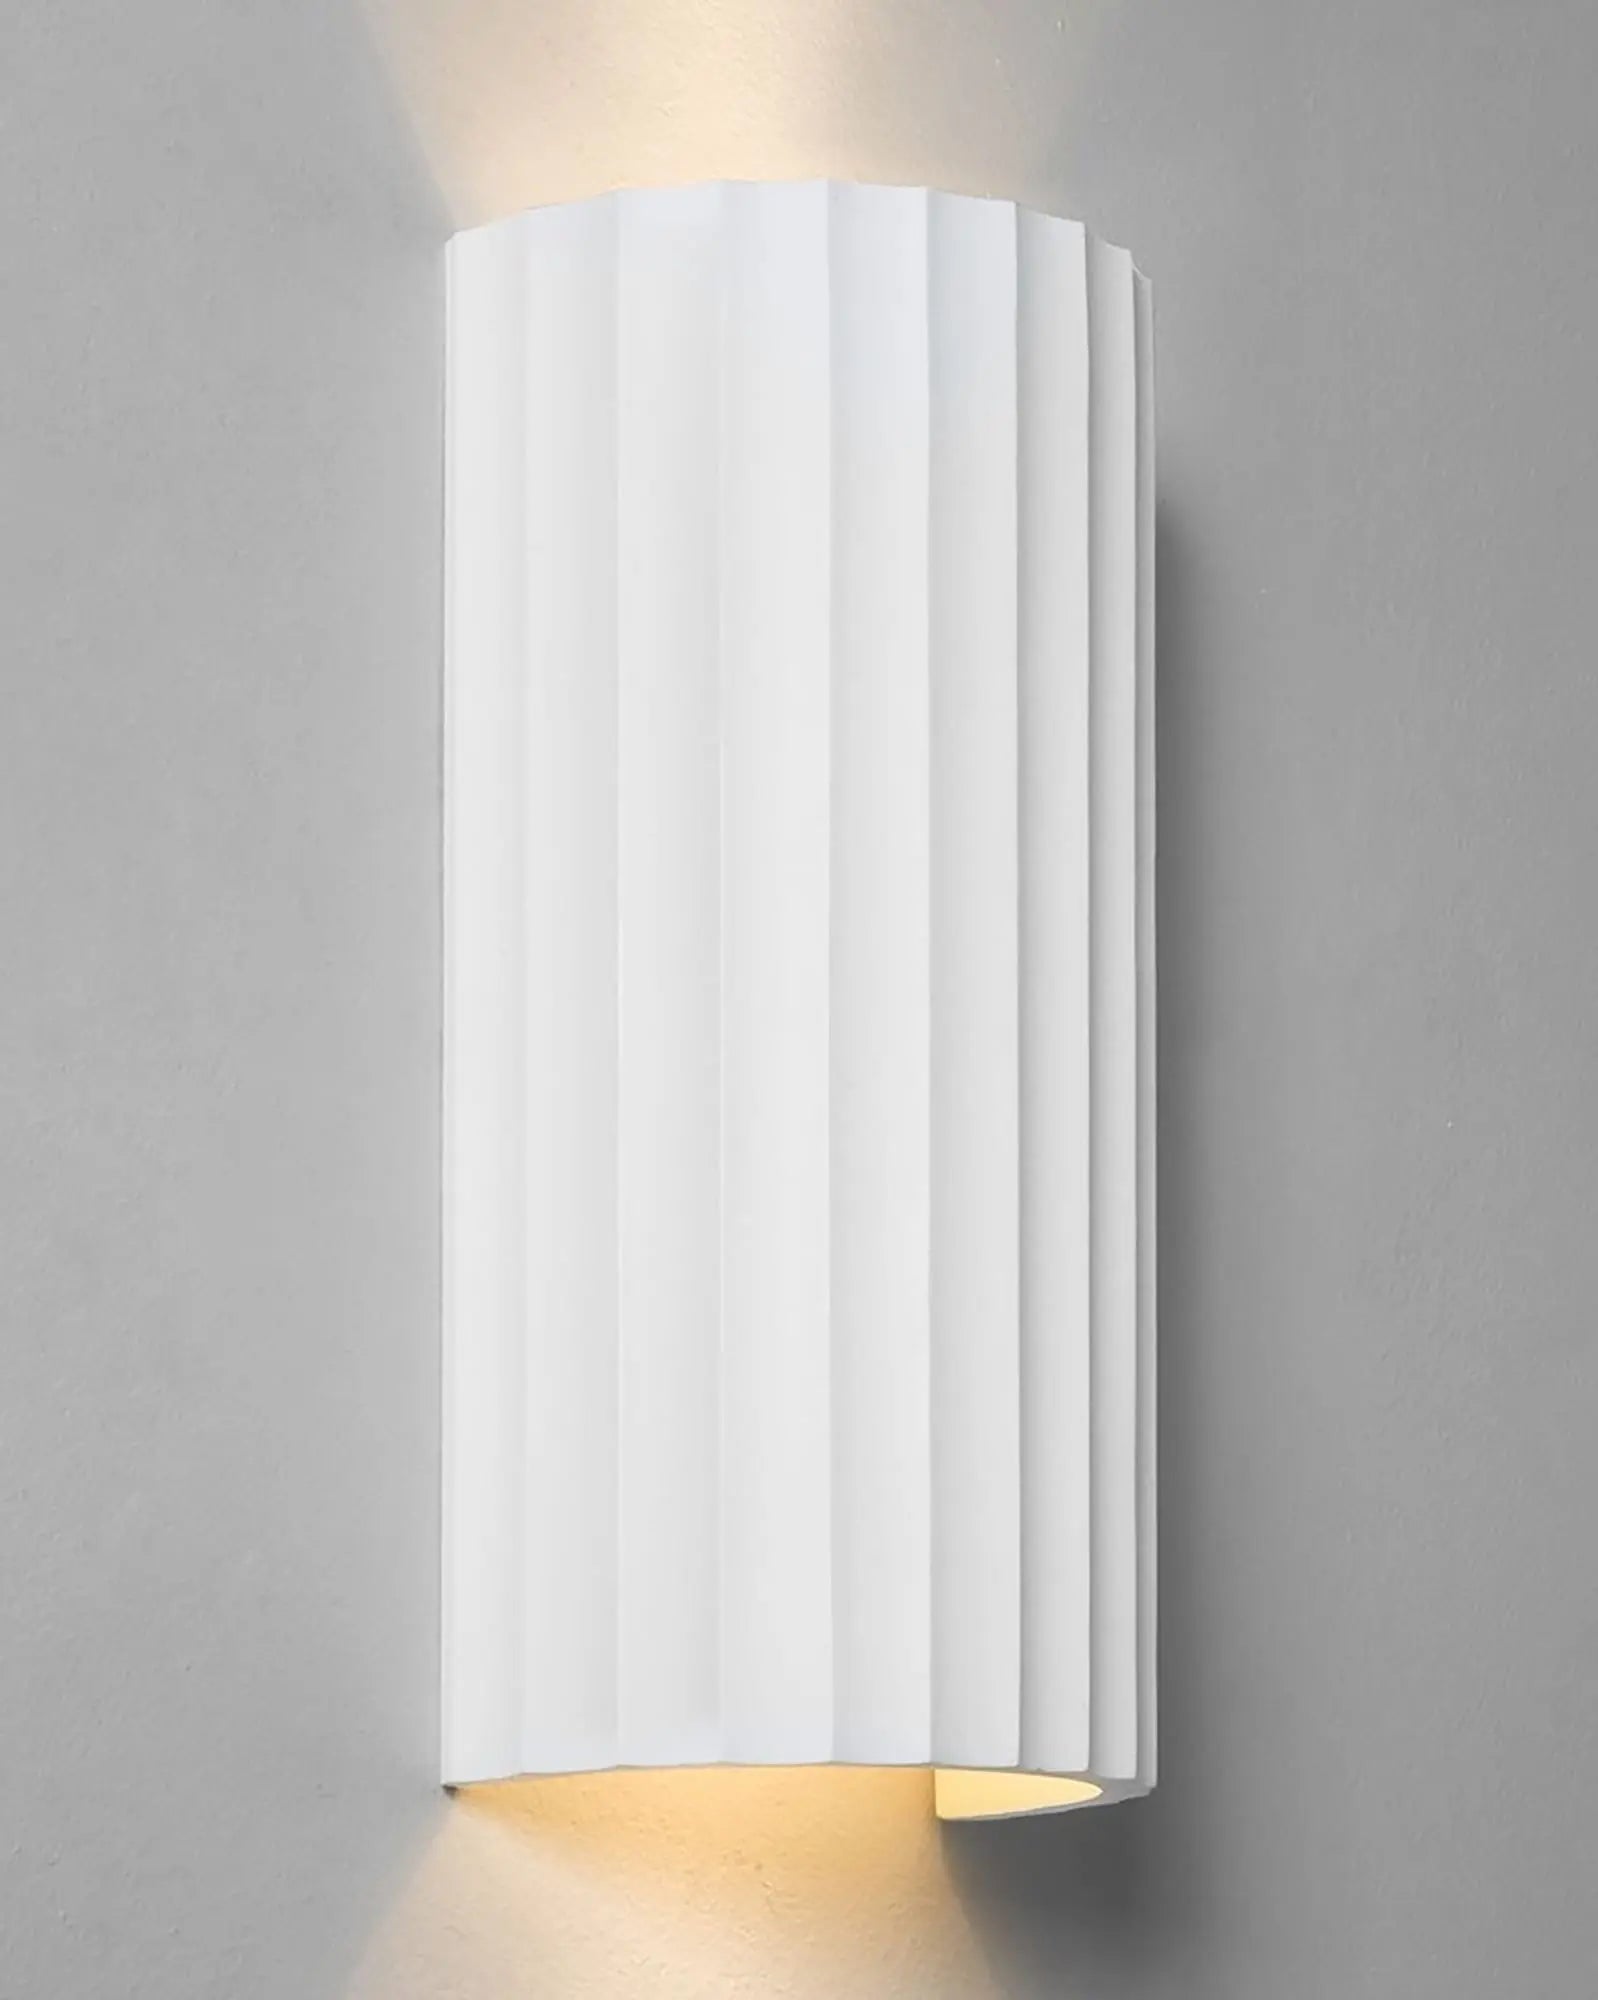 Kymi contemporary architectural wall light